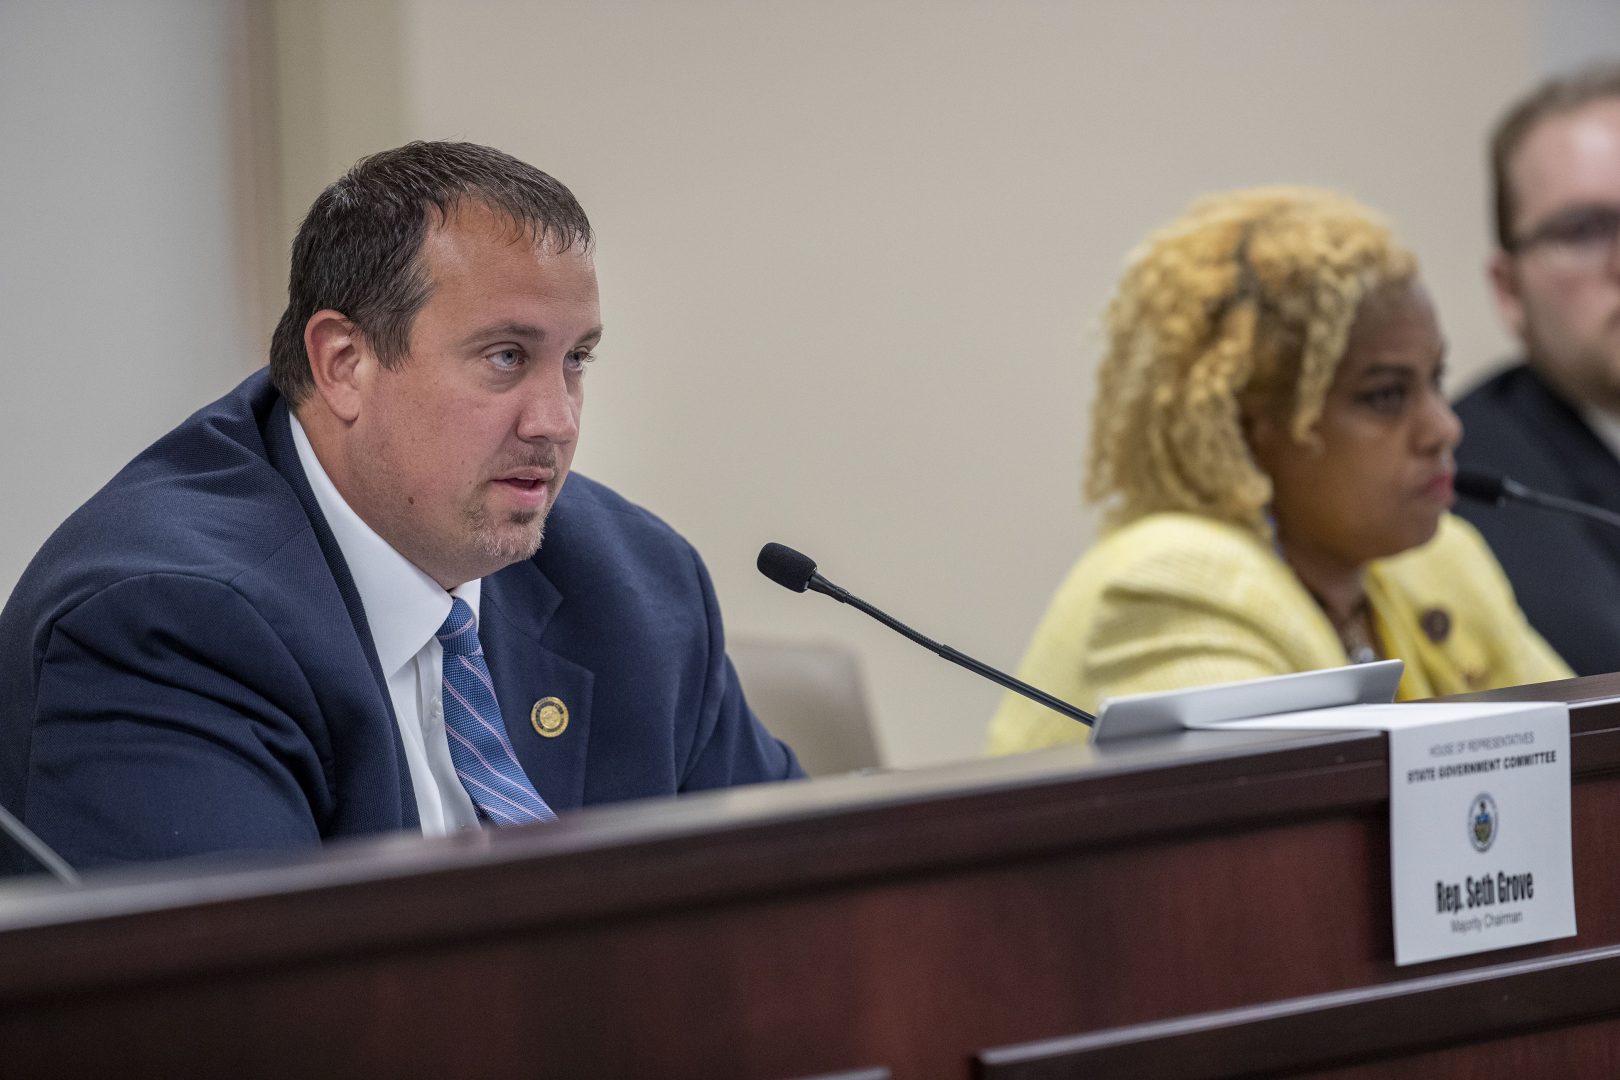 The state's next congressional map will begin its journey through the legislature in the House and Senate State Government Committees, chaired by Rep. Seth Grove (pictured) and Sen. David Argall.